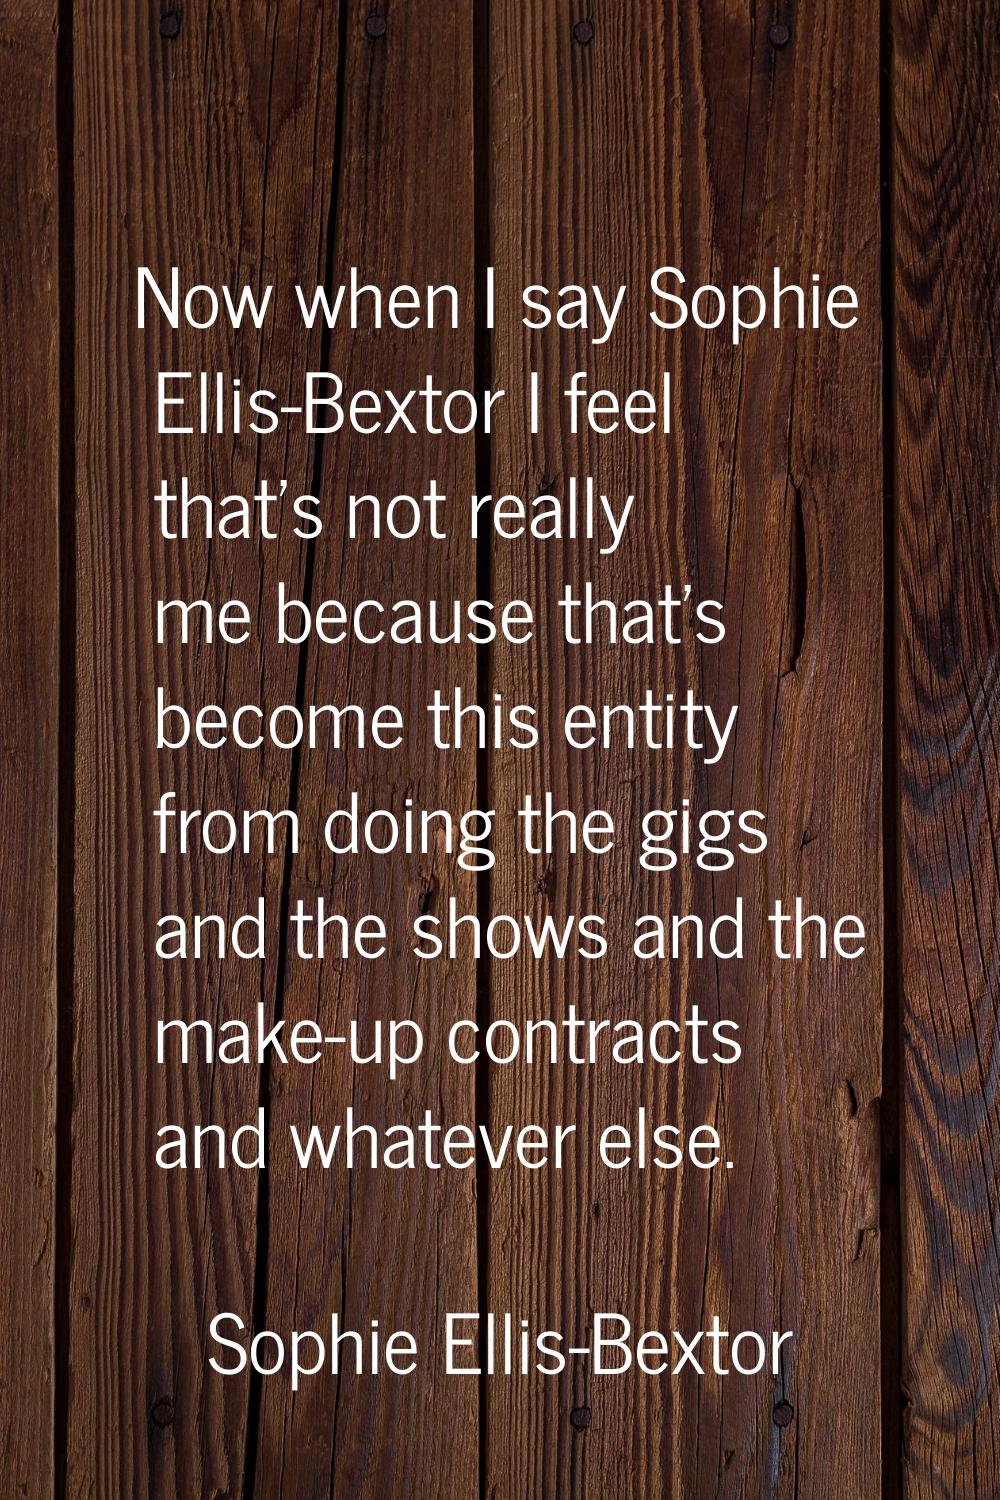 Now when I say Sophie Ellis-Bextor I feel that's not really me because that's become this entity fr